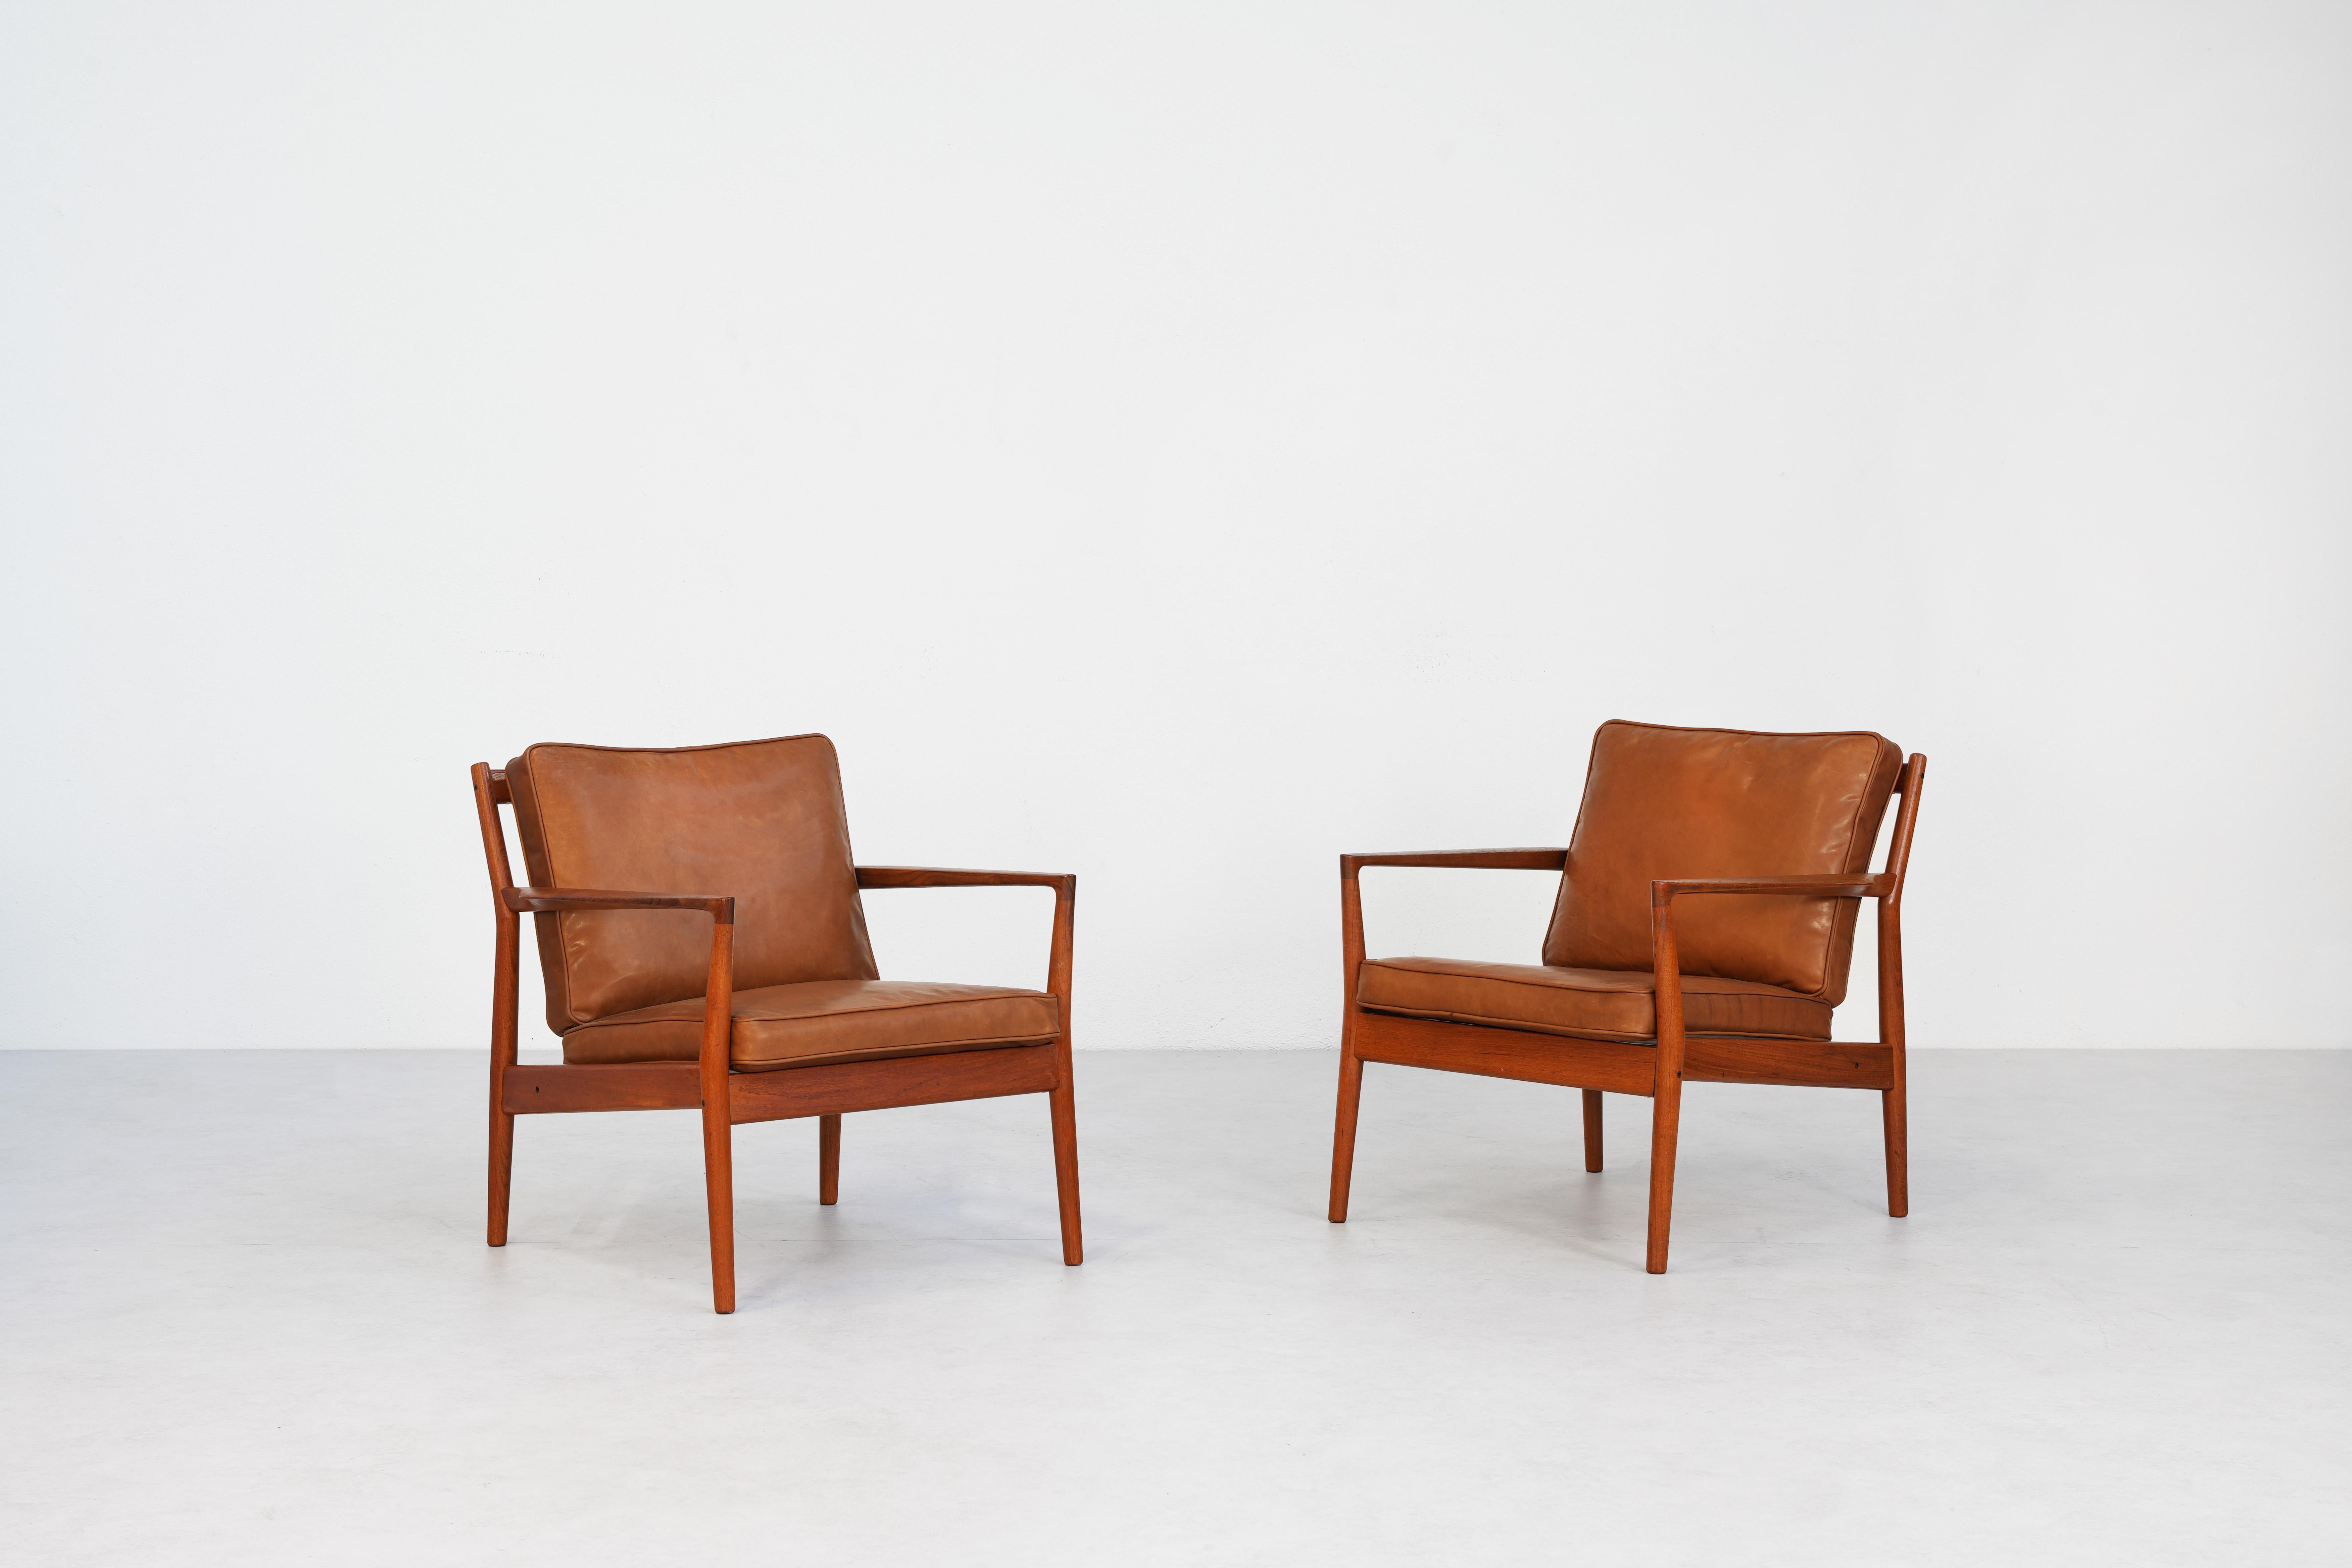 A pair of incredibly rare teakwood lounge chairs produced by Børge Jensen in Denmark in the 1960s. The frames feature sculptural blade arms and angled back slats. The feather cushions have been covered in new cognac brown aniline leather. Both